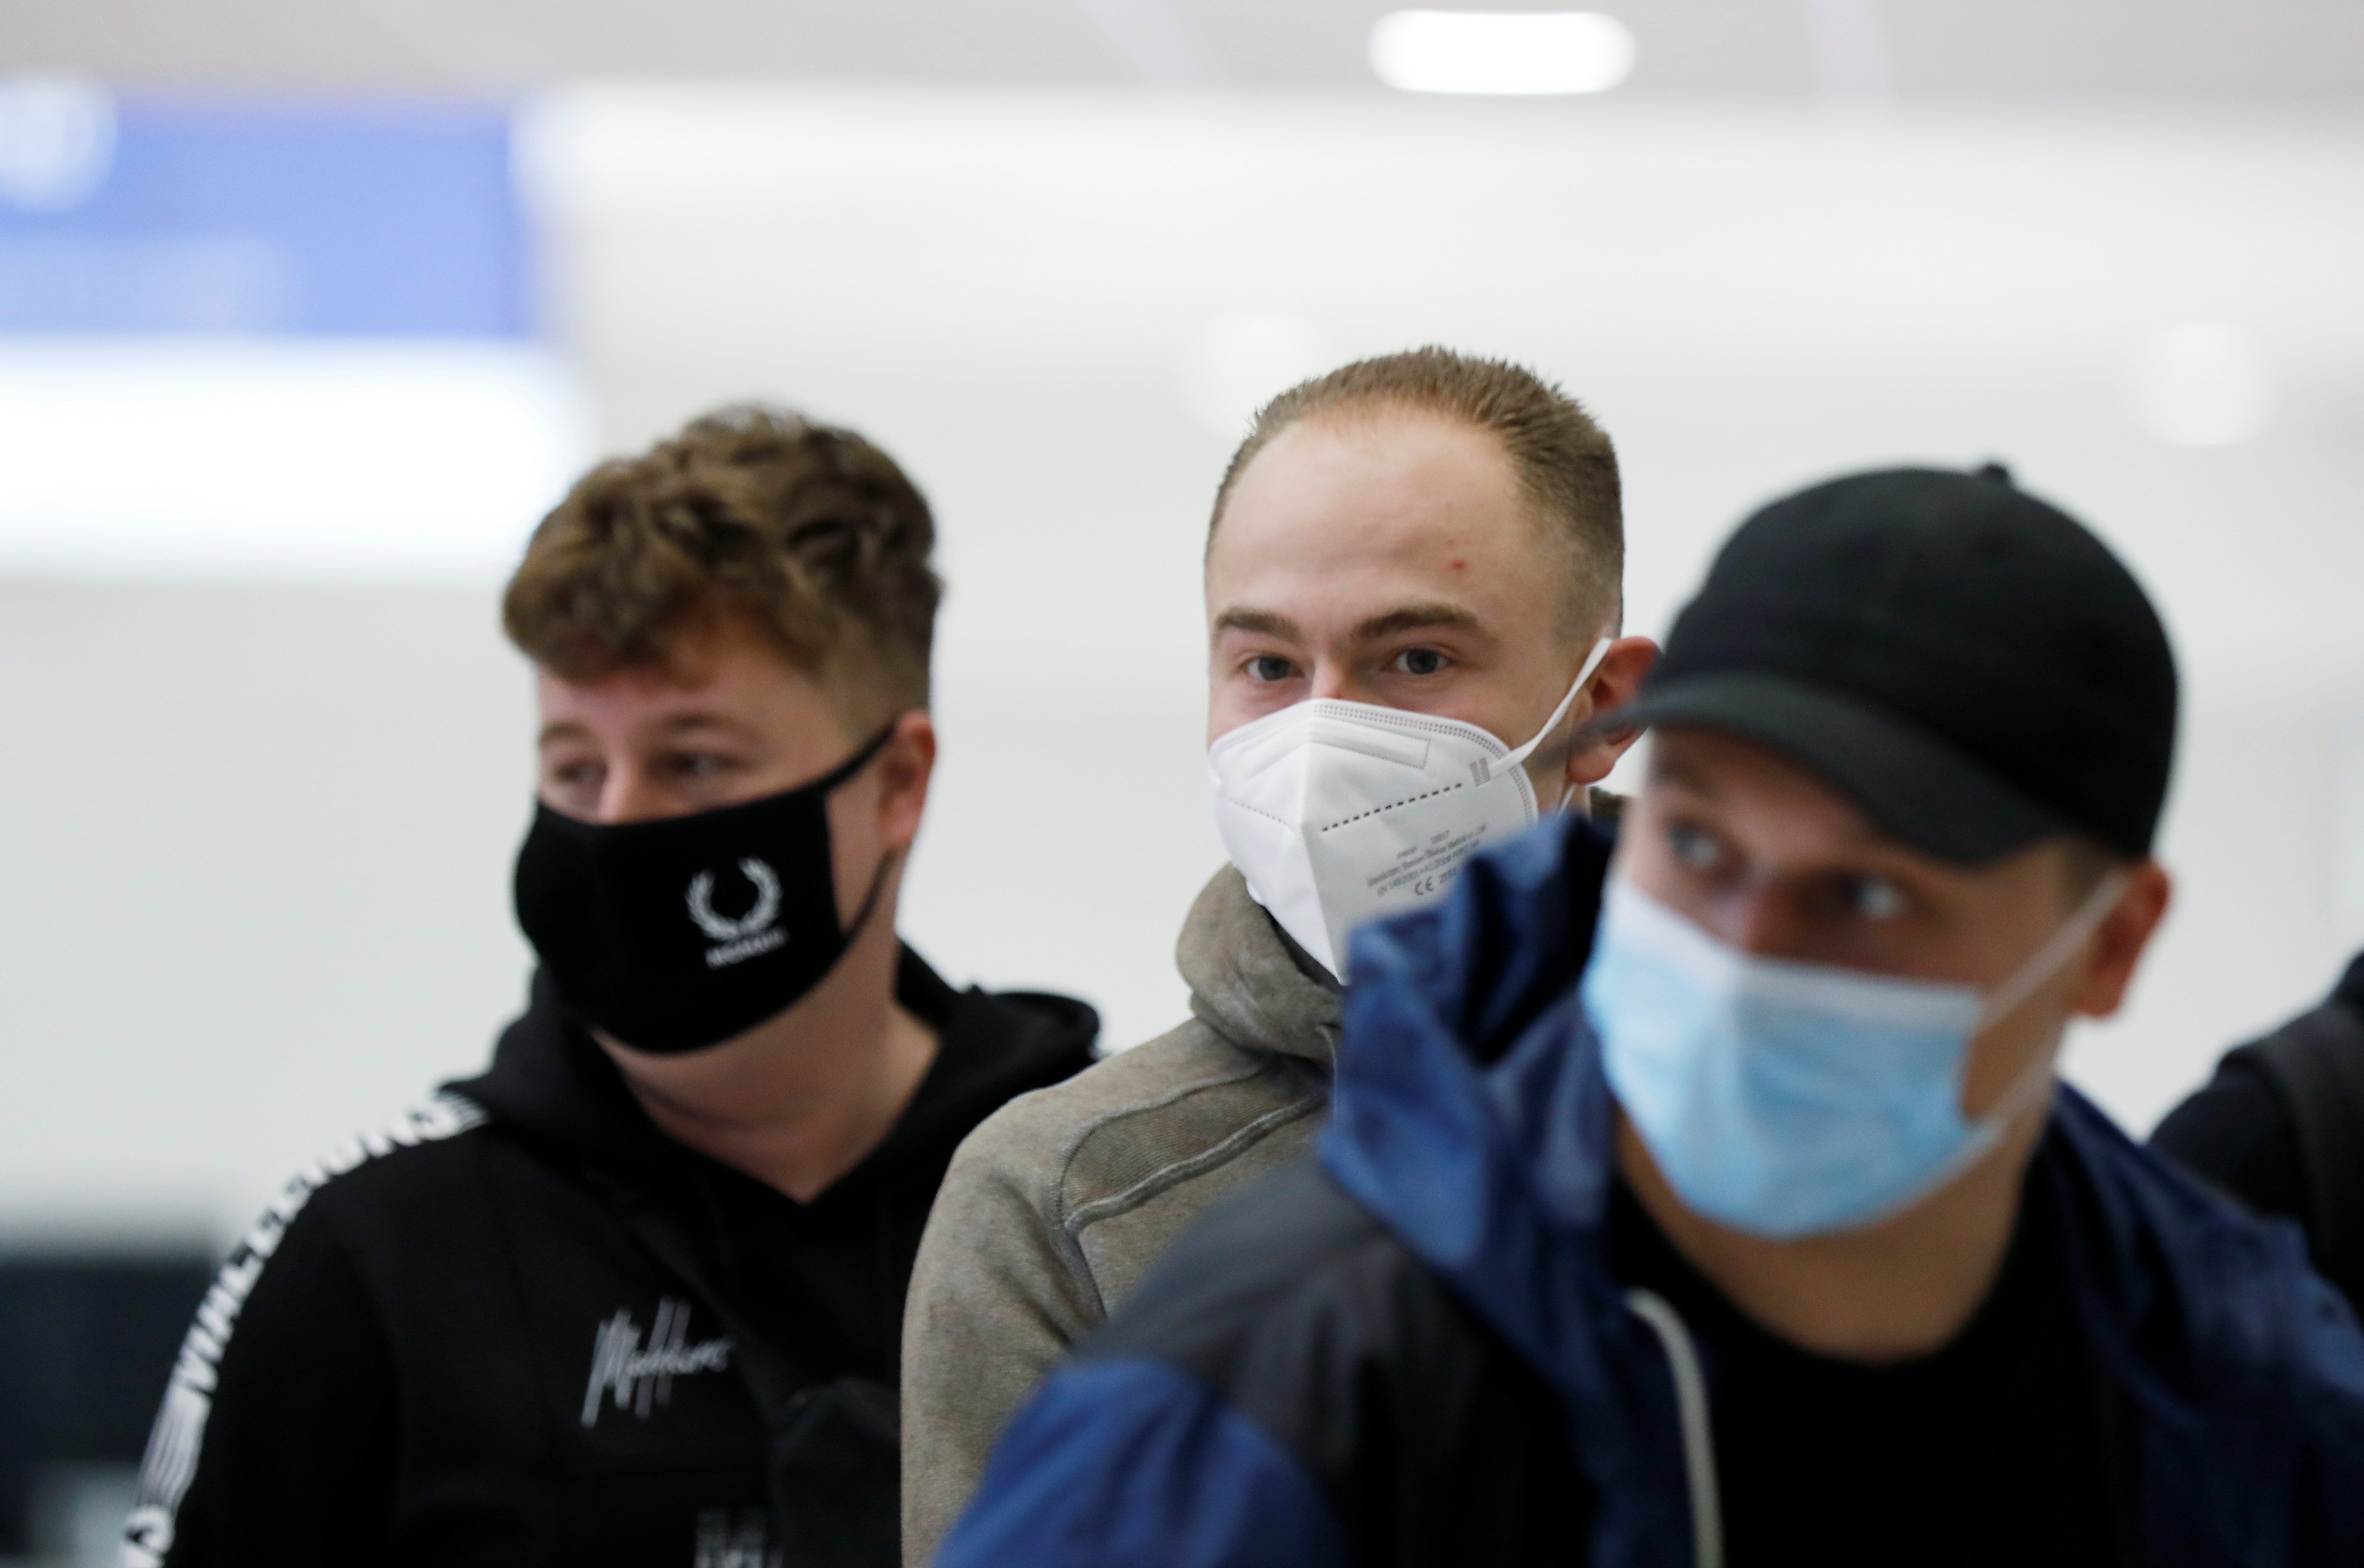 Dutch tourists, who will spend a week long holiday in isolation in their tourist resort as part of an experiment, arrive at the Rhodes International Airport, amid the coronavirus disease (COVID-19) outbreak on the island of Rhodes, Greece April 12, 2021. REUTERS/Louiza Vradi